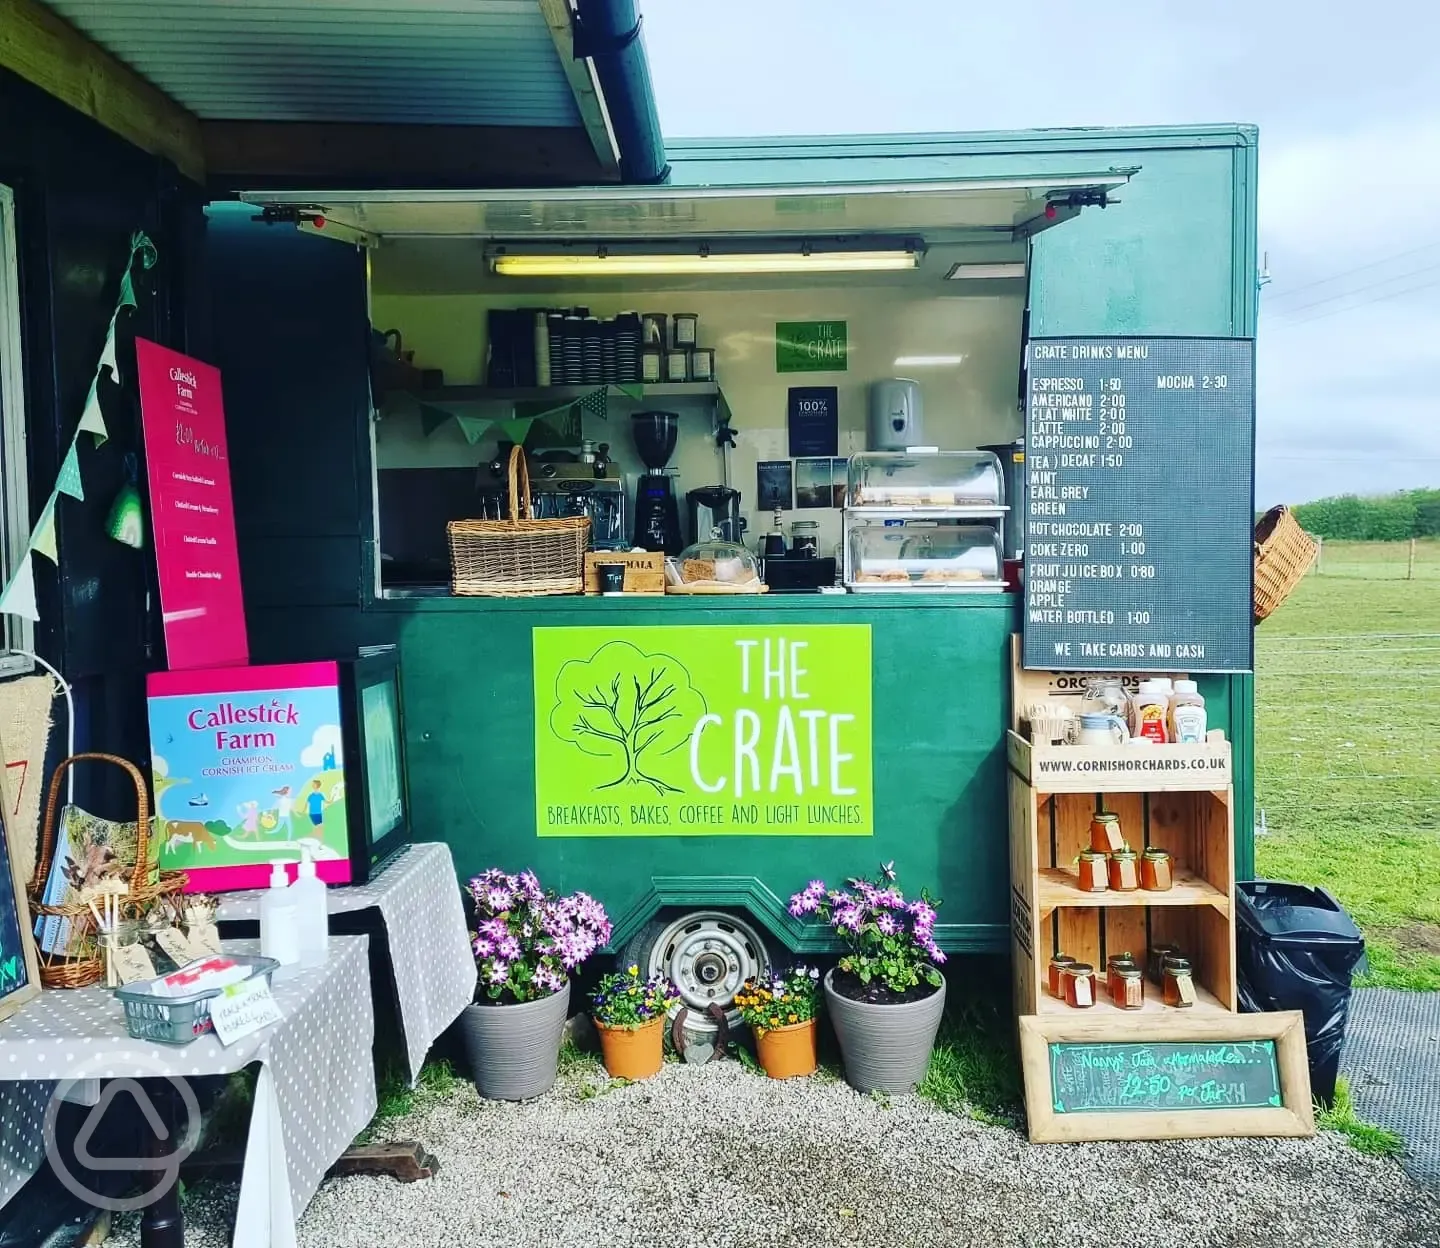 The Crate cafe